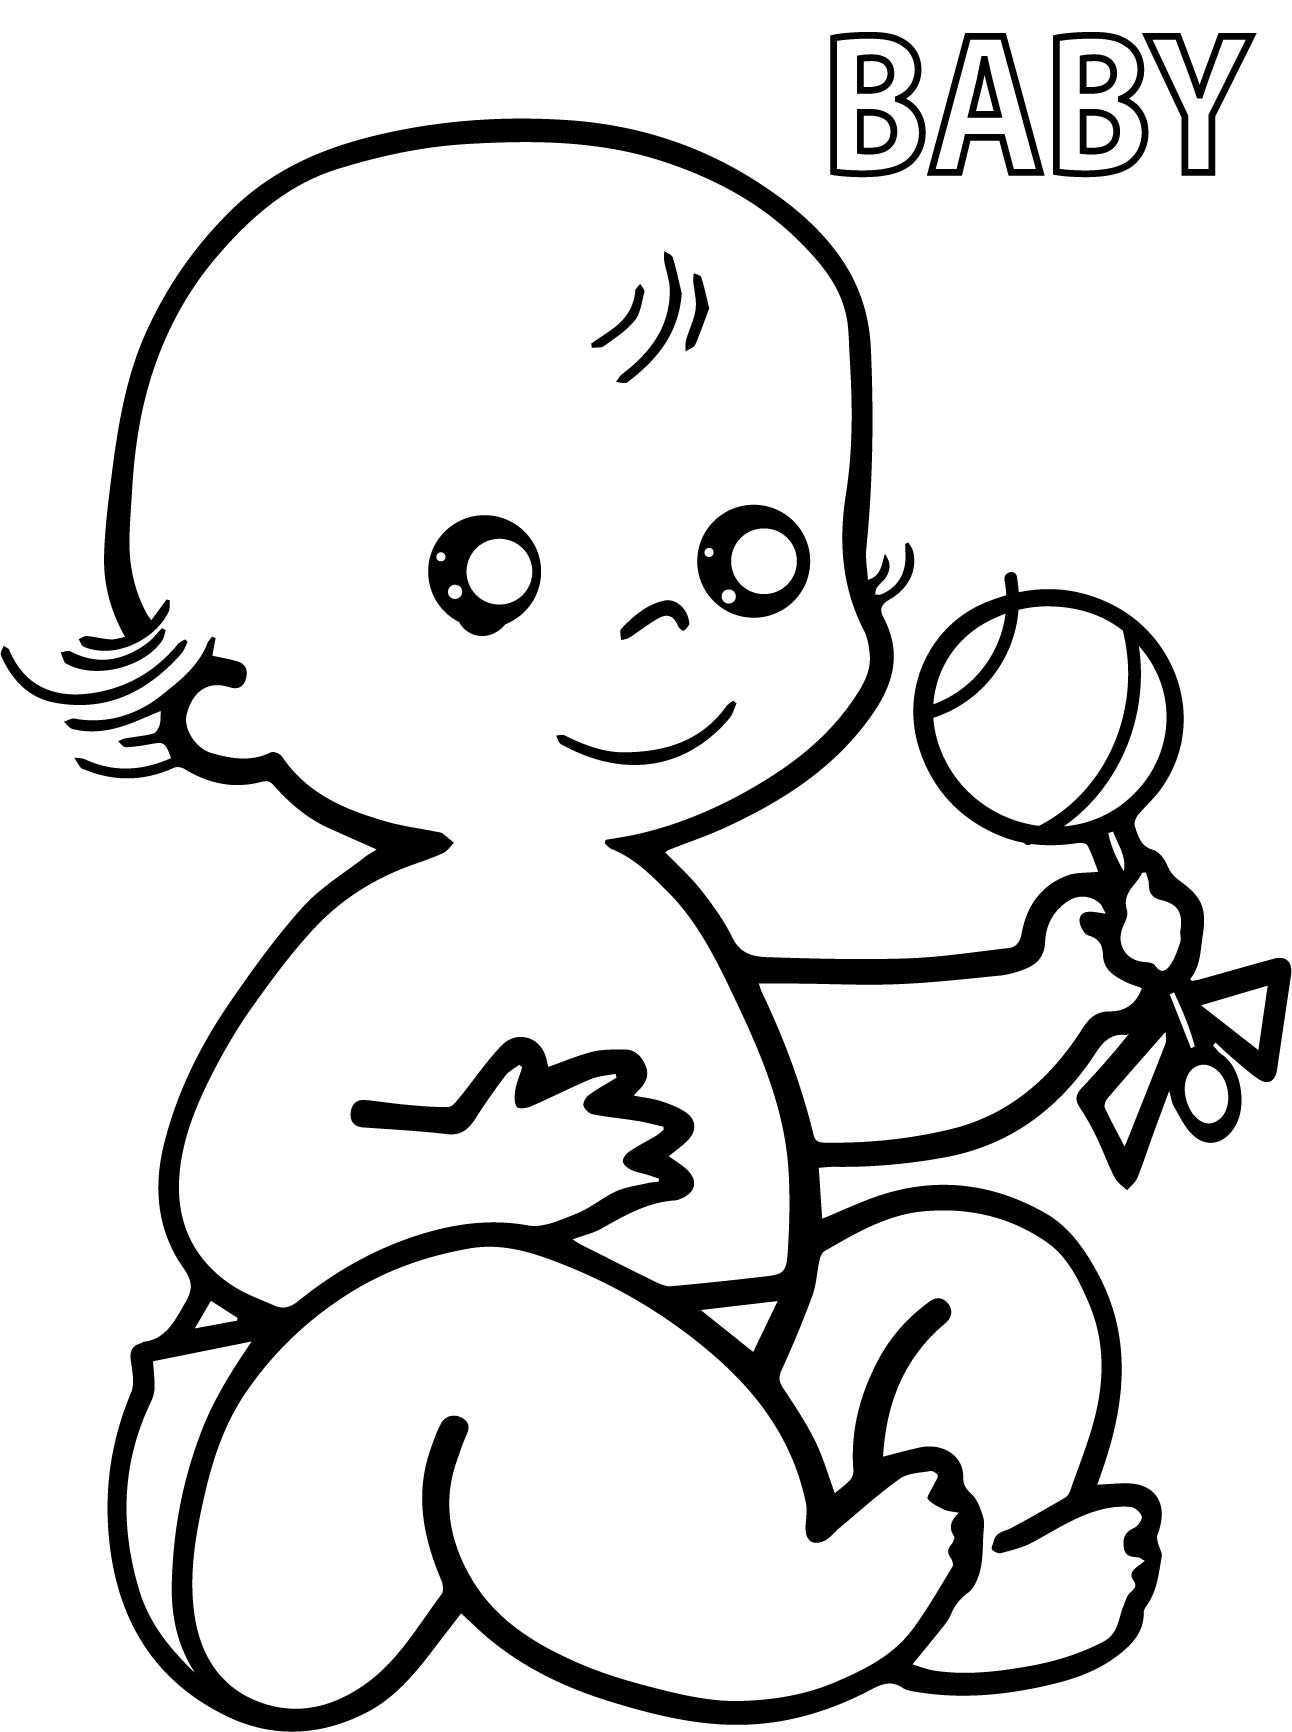 Baby Coloring Sheet
 Preschool Baby Coloring Pages